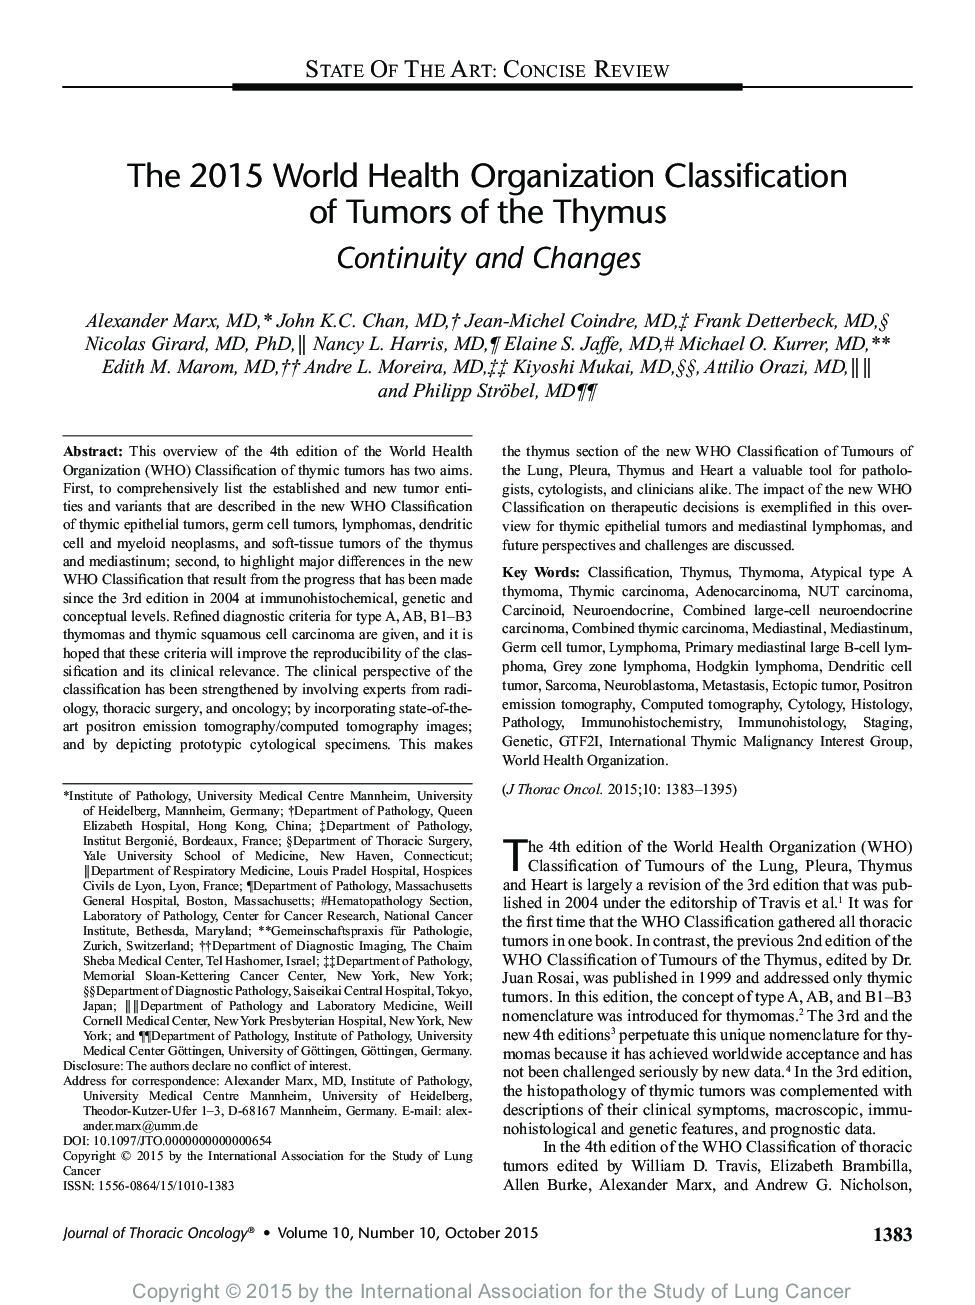 The 2015 World Health Organization Classification of Tumors of the Thymus: Continuity and Changes